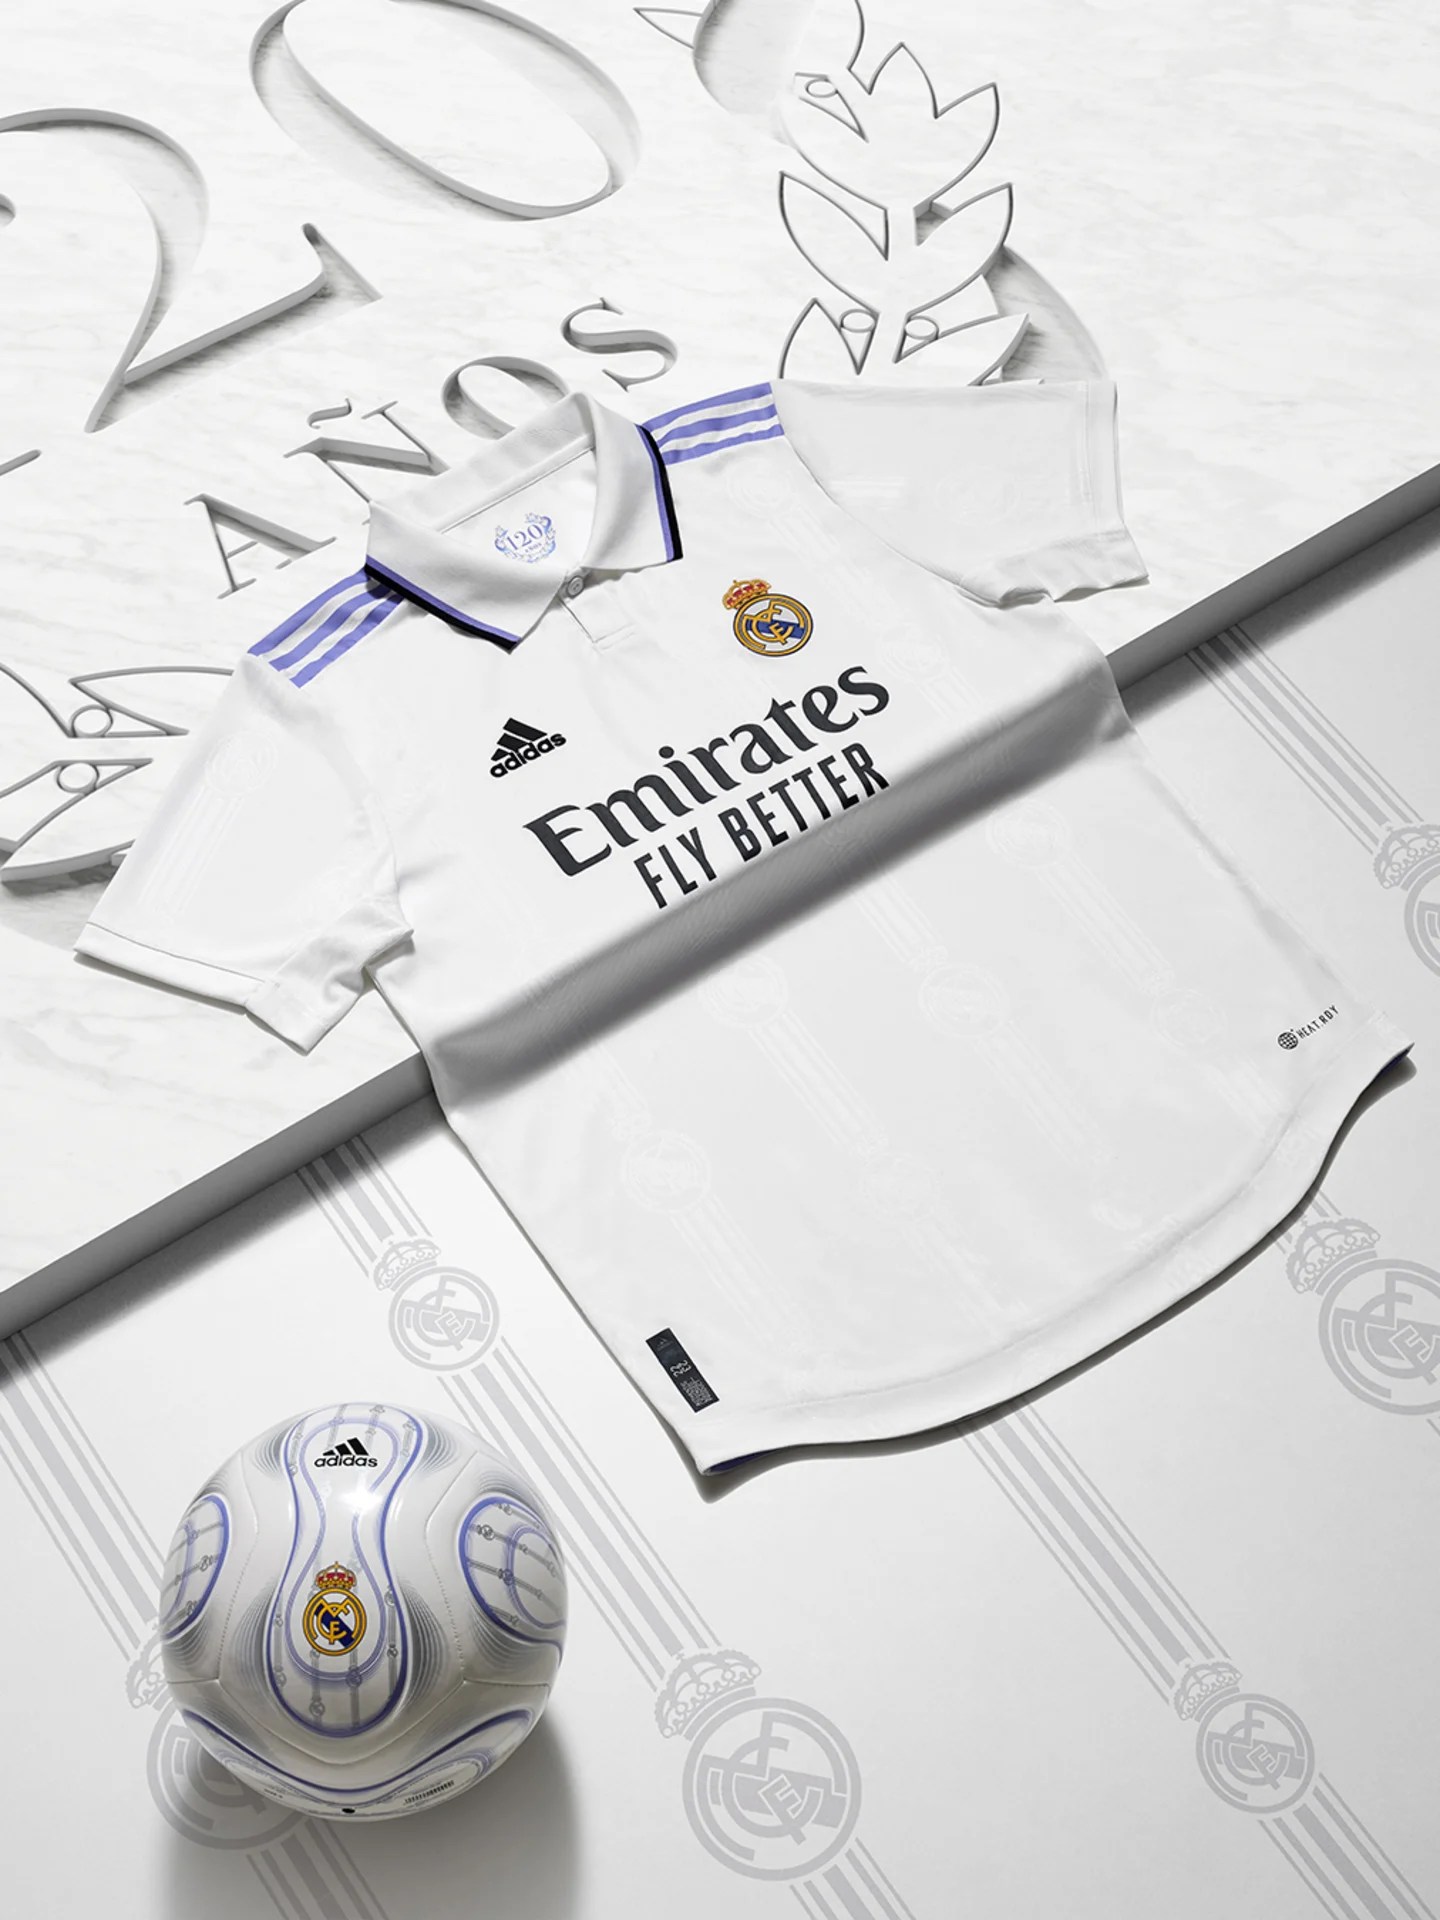 Real Madrid New Jersey: Real Madrid release SPECIAL 120th Anniversary kit for next season ahead of Champions League Final - Check Pictures